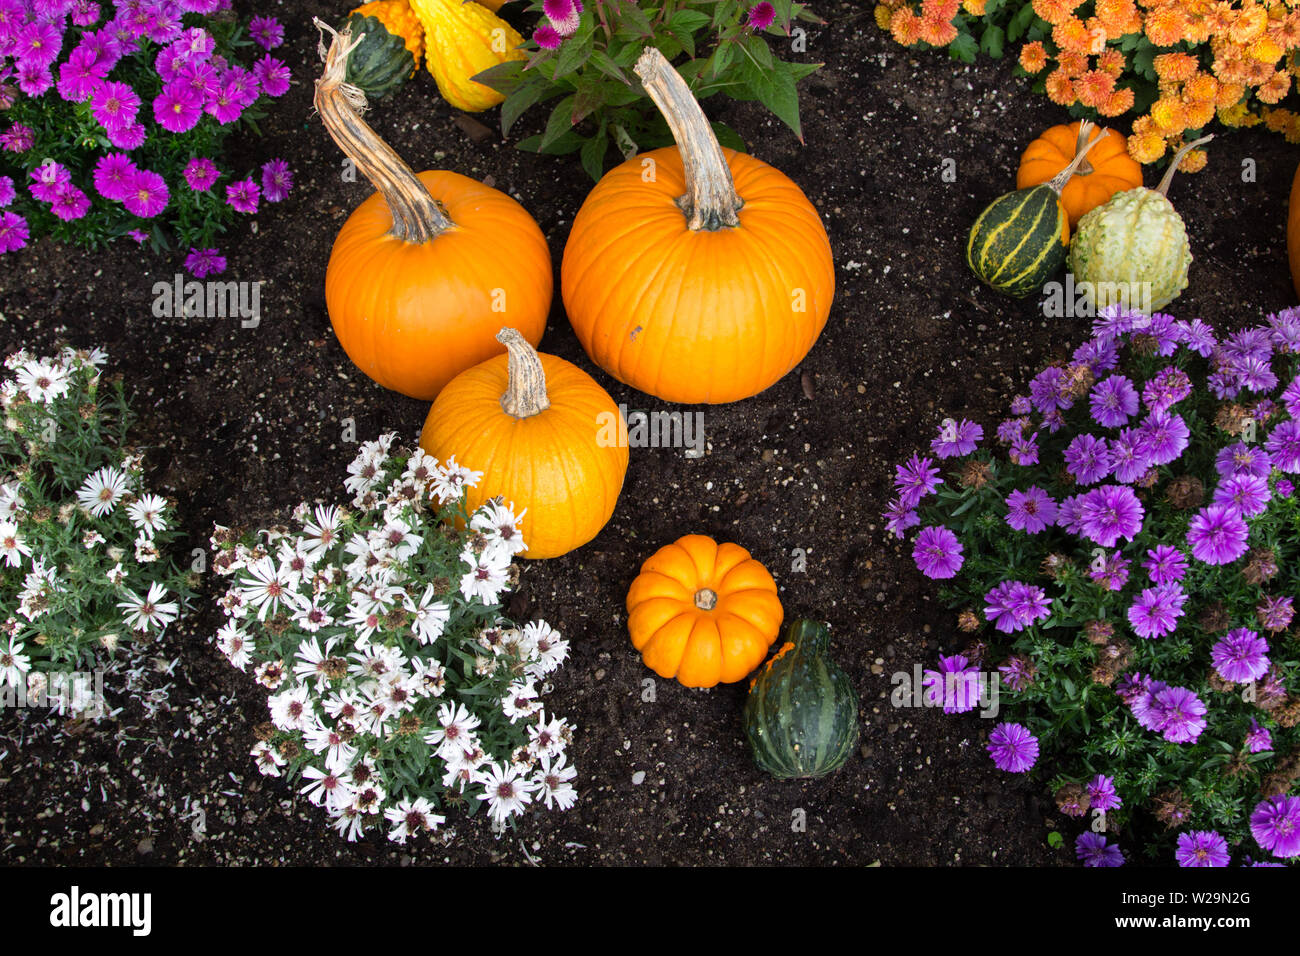 Autumn Harvest Background. Pumpkins and vibrant colored Chrysanthemums in rich black garden soil. Shot from above with bright natural color. Stock Photo